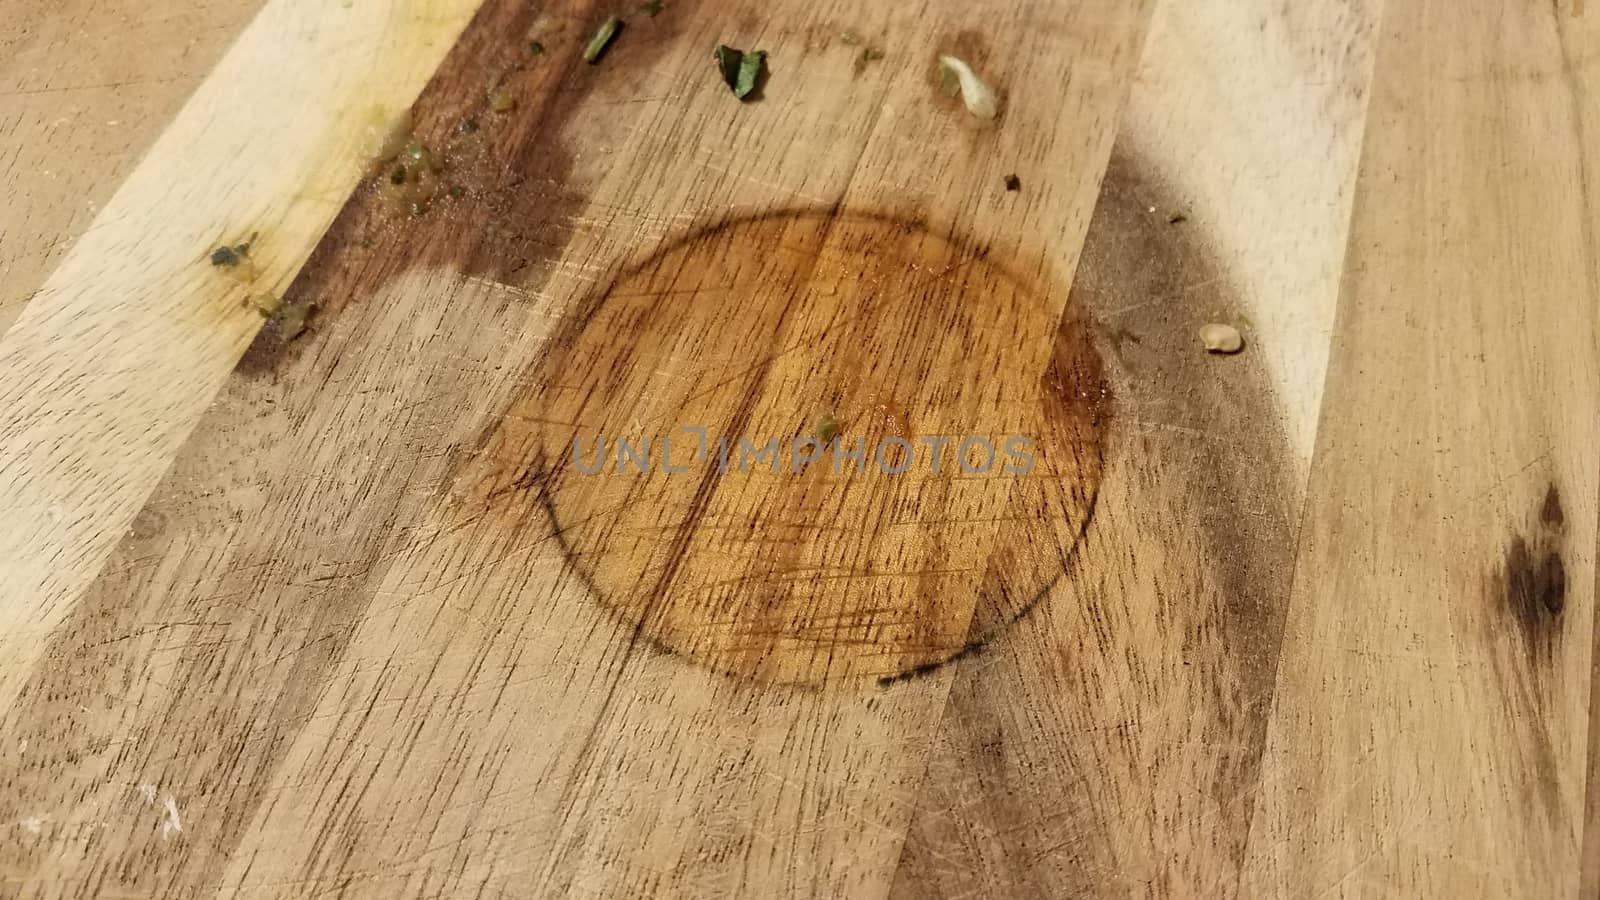 dirty wooden cutting board with bits of food and circular stain by stockphotofan1